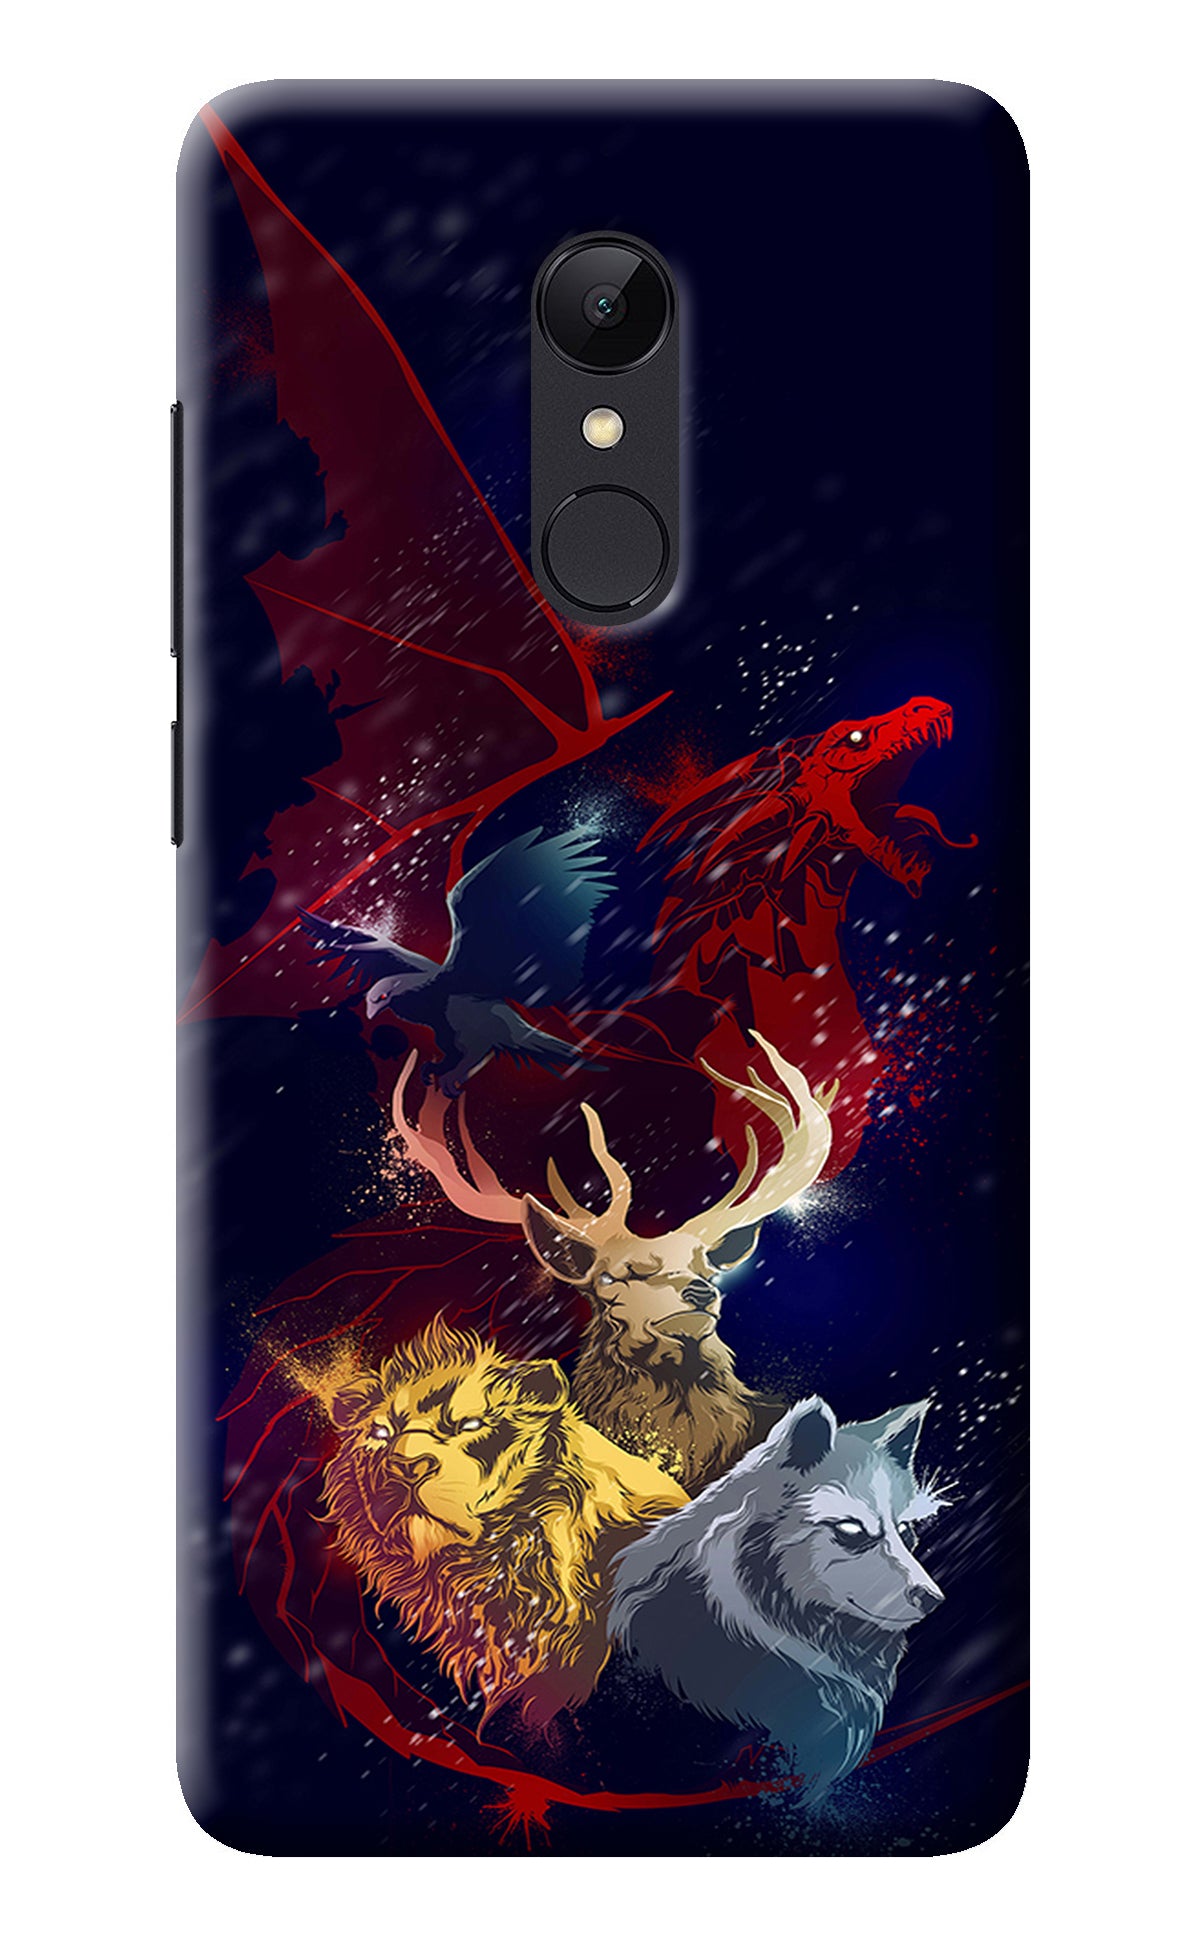 Game Of Thrones Redmi Note 4 Back Cover